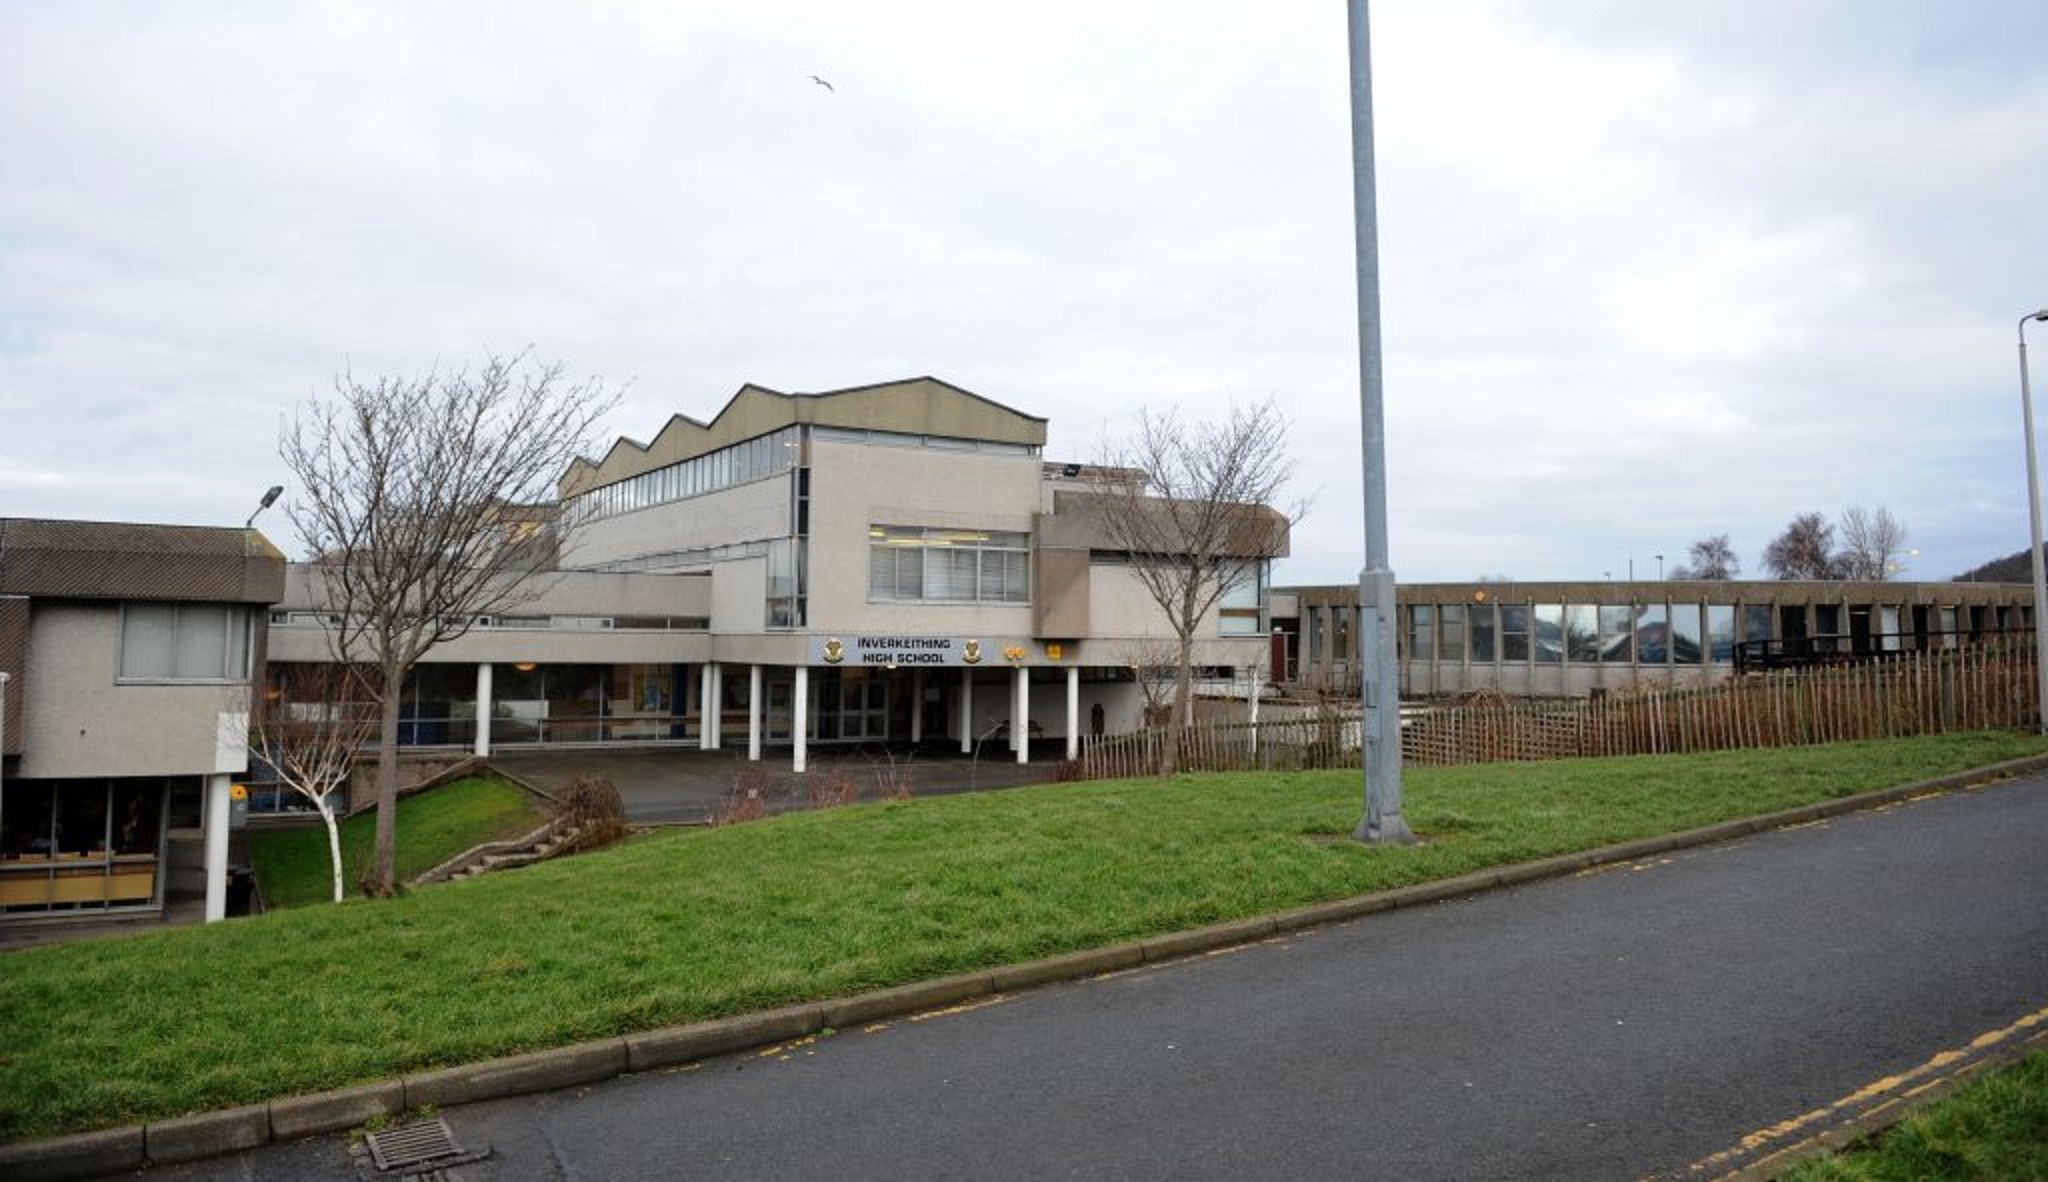 The existing Inverkeithing High School.